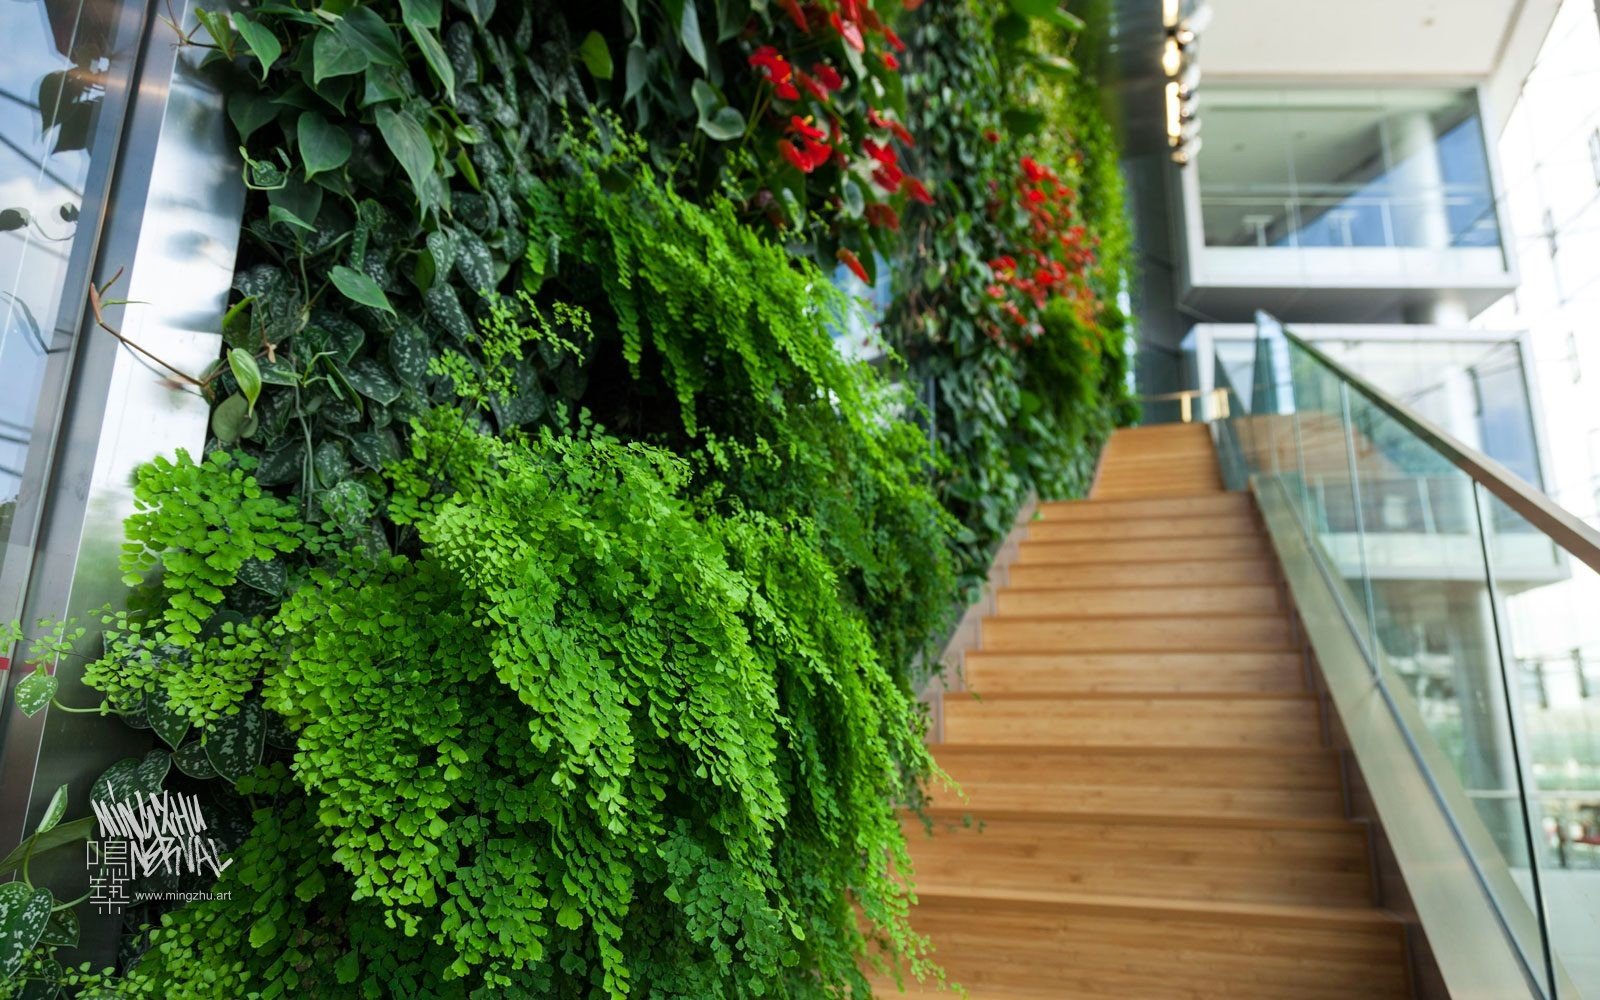 At Mingzhu Nerval, we thrive at creating the most beautiful vertical gardens in the world. For ICBC, we created an enormous living wall design - Shanghai, 2012.